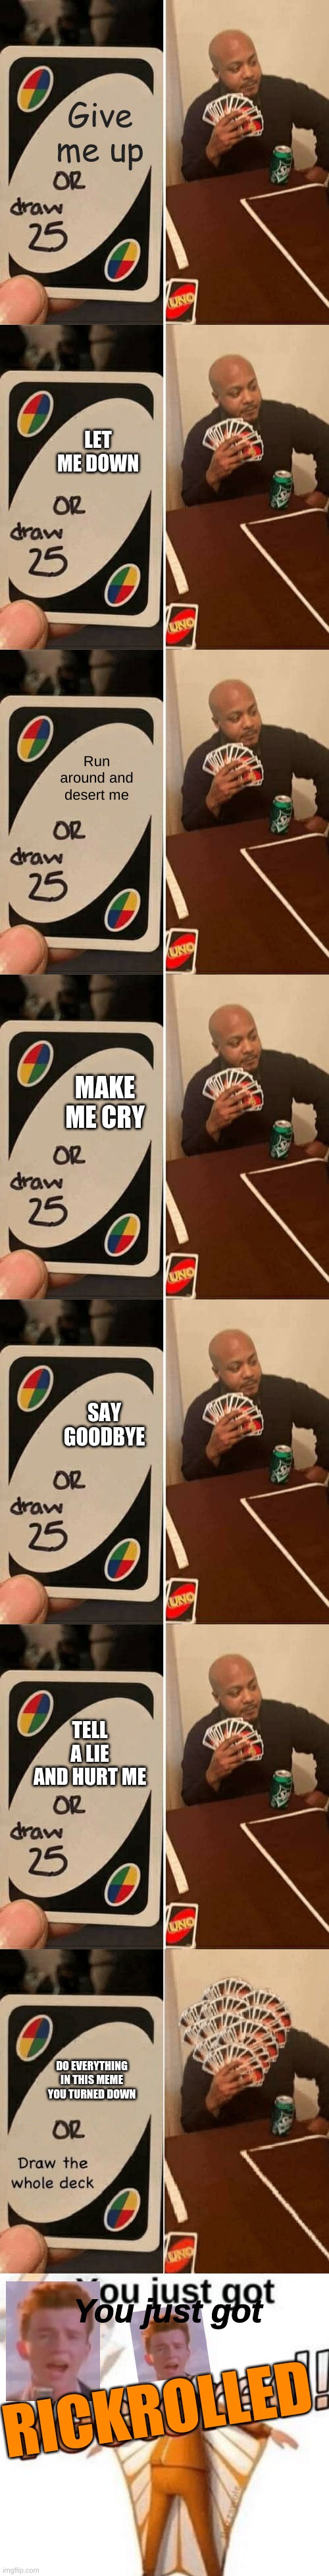 Lol | Give me up; LET ME DOWN; Run around and desert me; MAKE ME CRY; SAY GOODBYE; TELL A LIE AND HURT ME; DO EVERYTHING IN THIS MEME YOU TURNED DOWN; You just got; RICKROLLED | image tagged in memes,uno draw 25 cards,uno draw the whole deck,you just got vectored,rickroll,rick astley | made w/ Imgflip meme maker